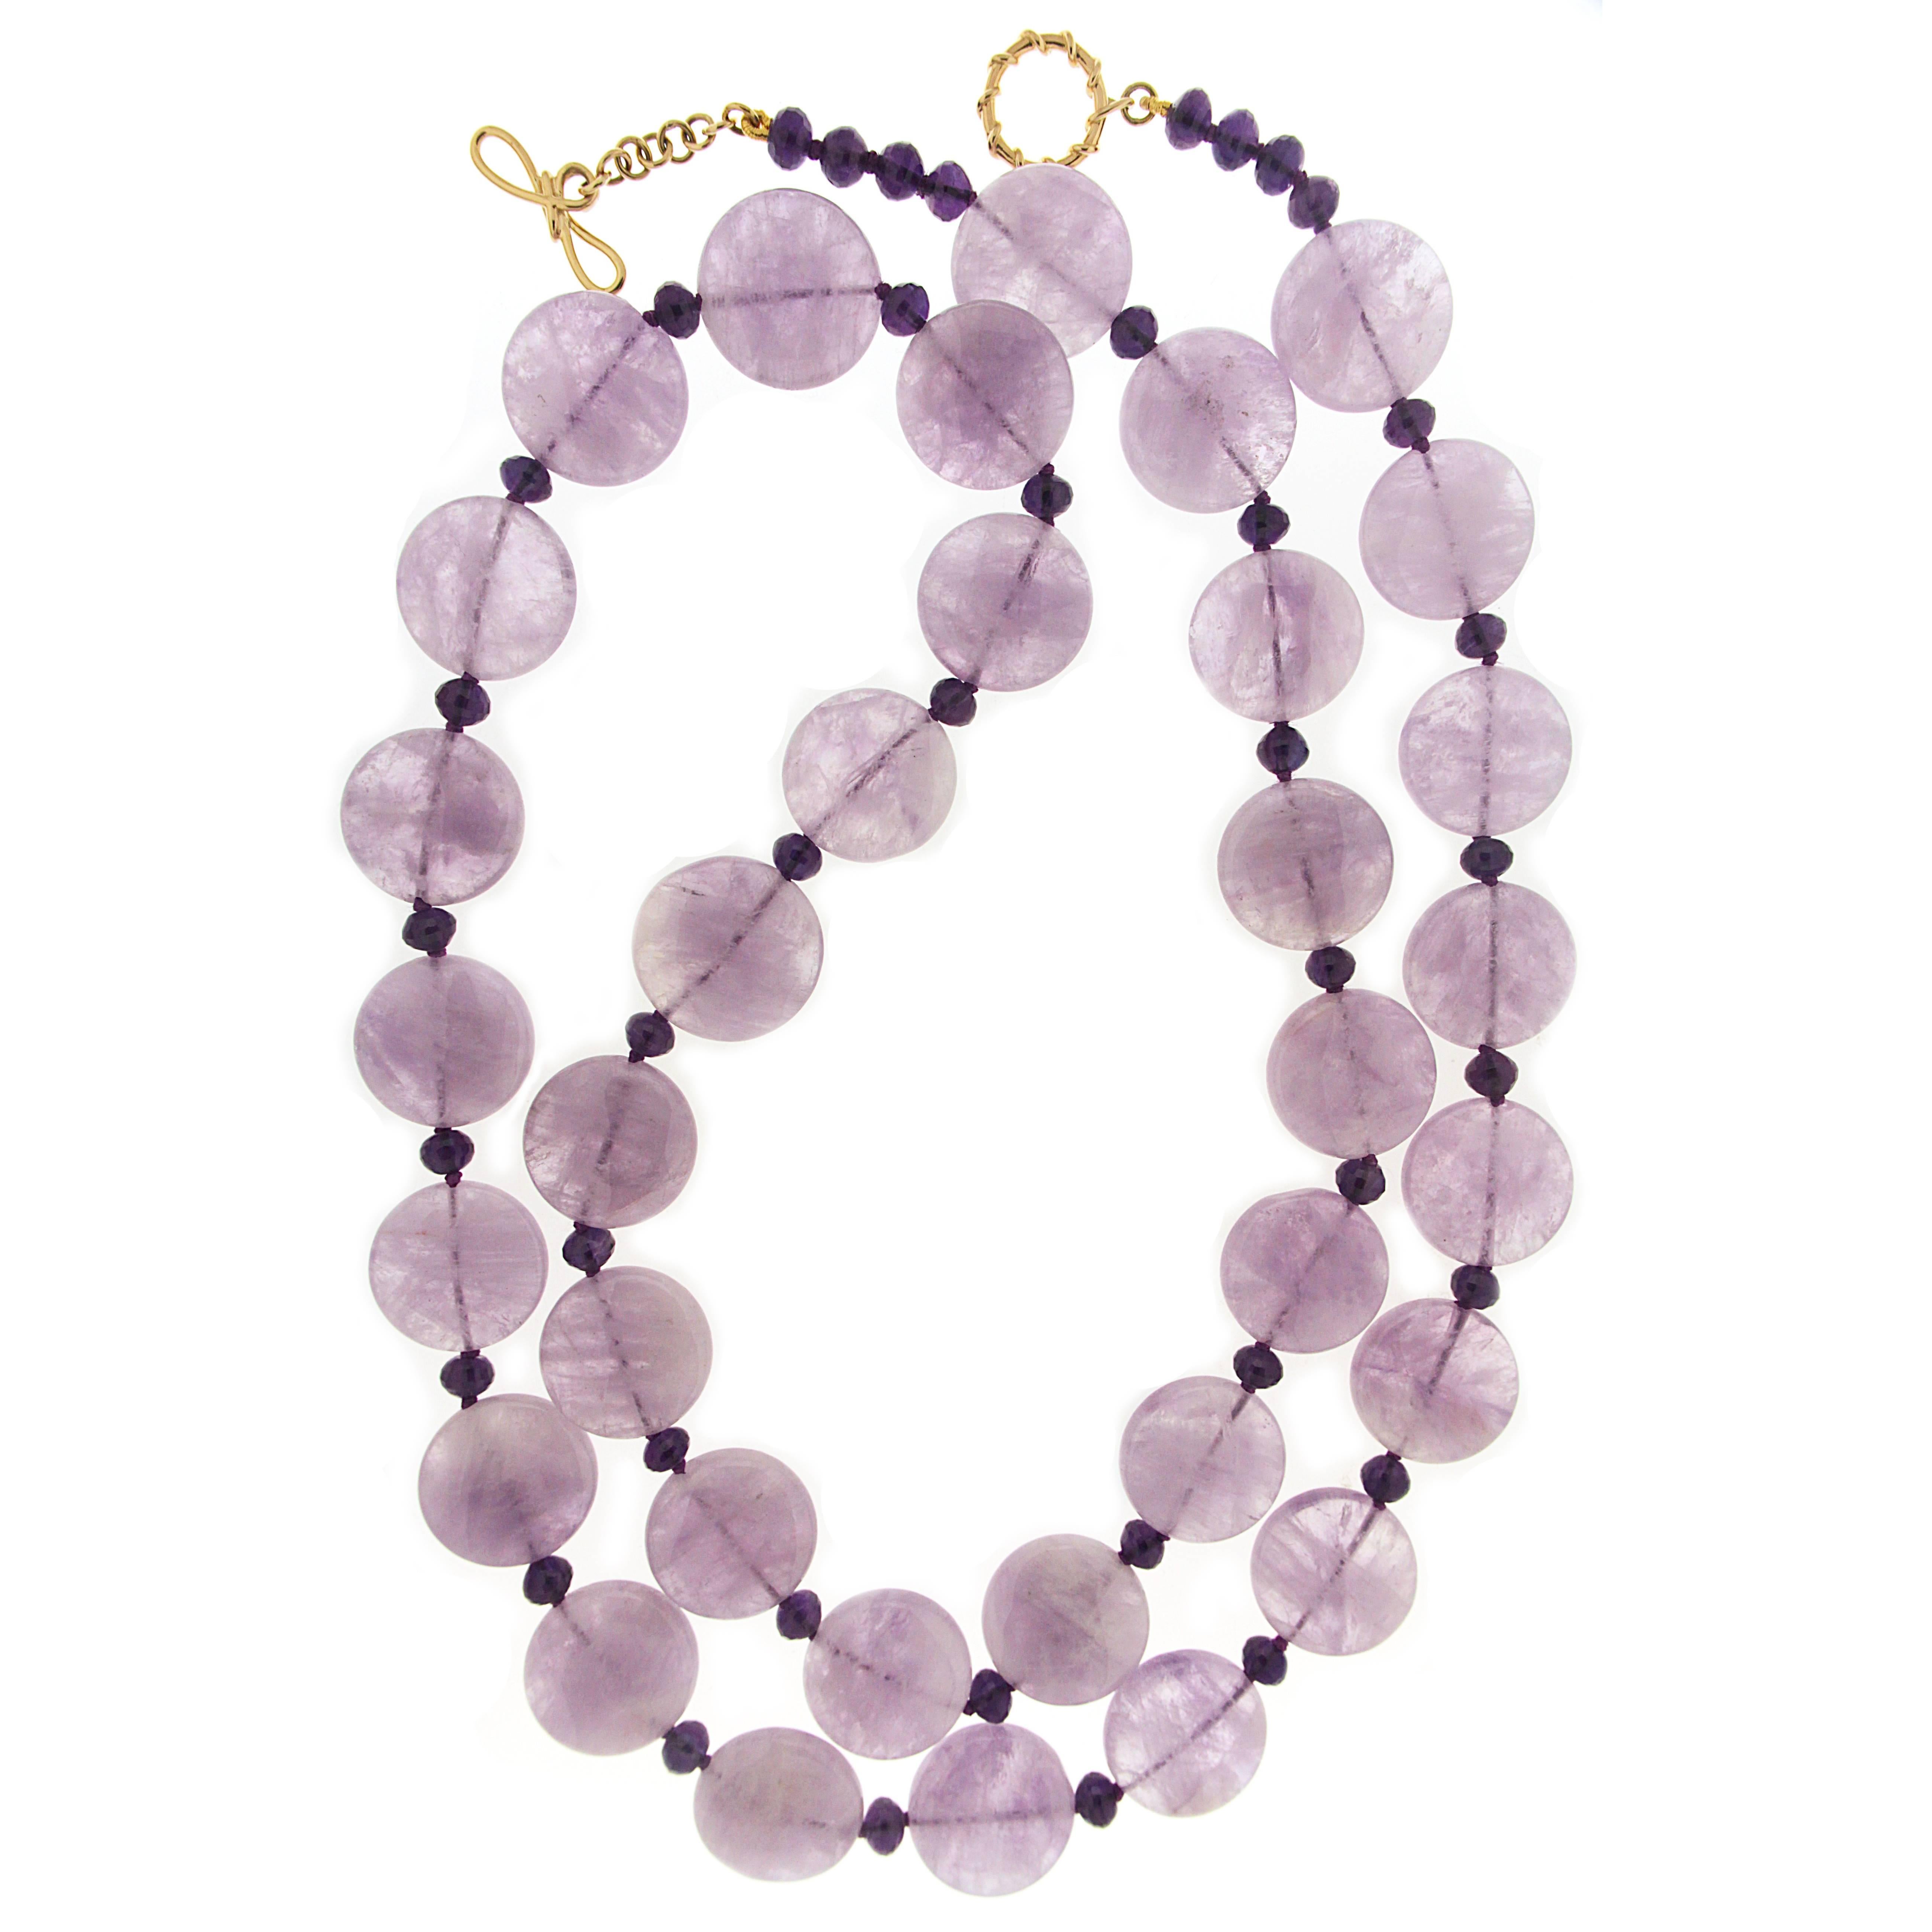 This unique necklace features 20mm Round Amethyst Disk & Amethyst Roundels necklace with our signature lasso ring and toggle in 18kt yellow gold. 